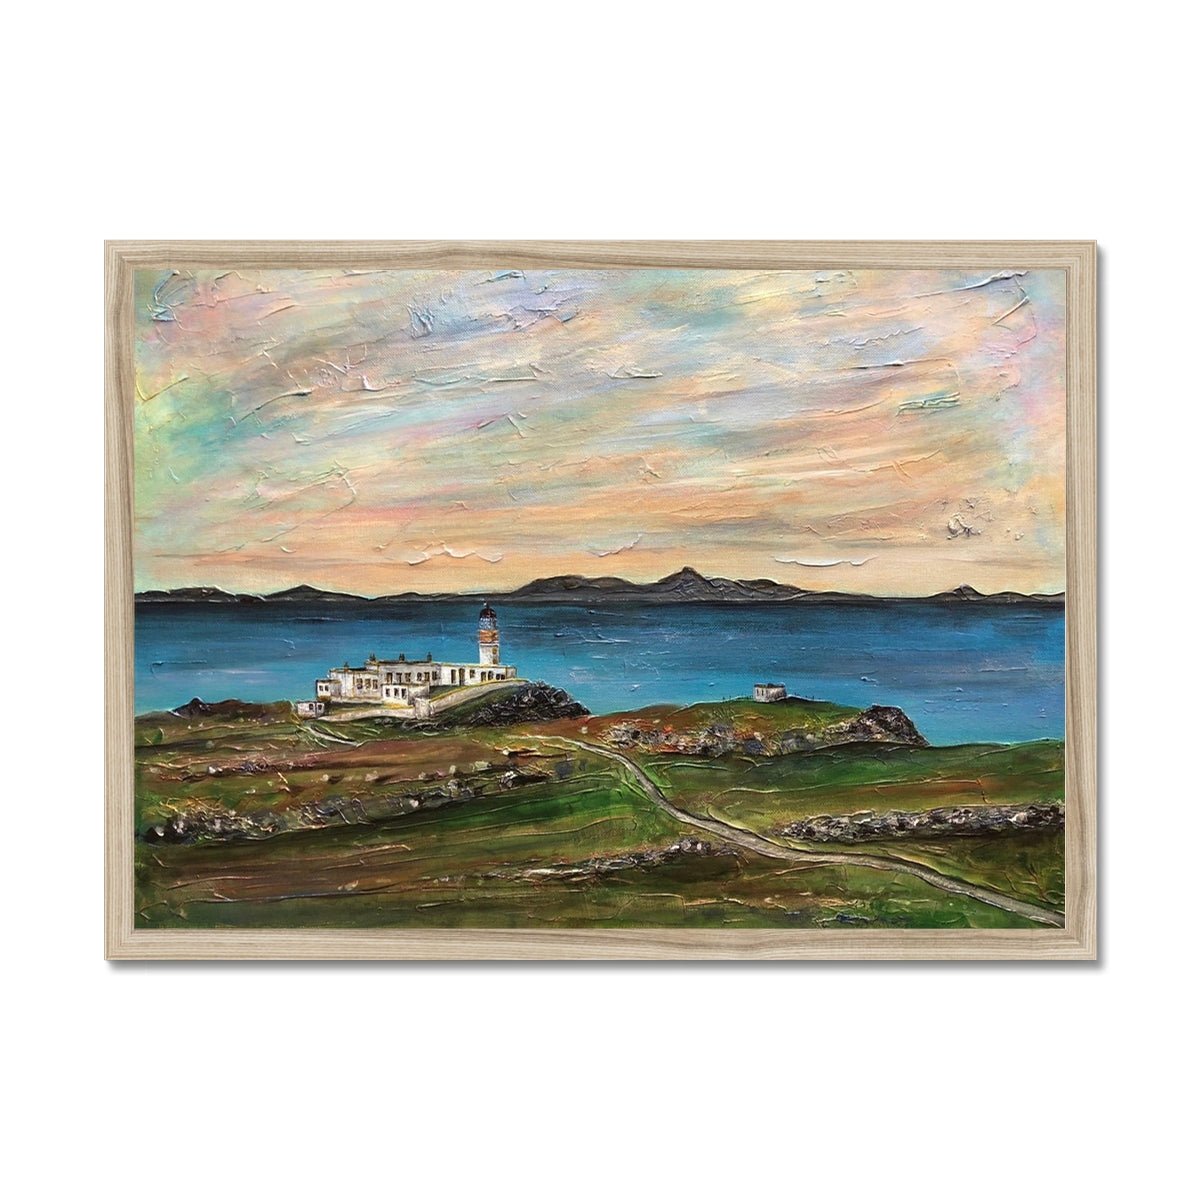 Neist Point Skye Painting | Framed Prints From Scotland-Framed Prints-Skye Art Gallery-A2 Landscape-Natural Frame-Paintings, Prints, Homeware, Art Gifts From Scotland By Scottish Artist Kevin Hunter